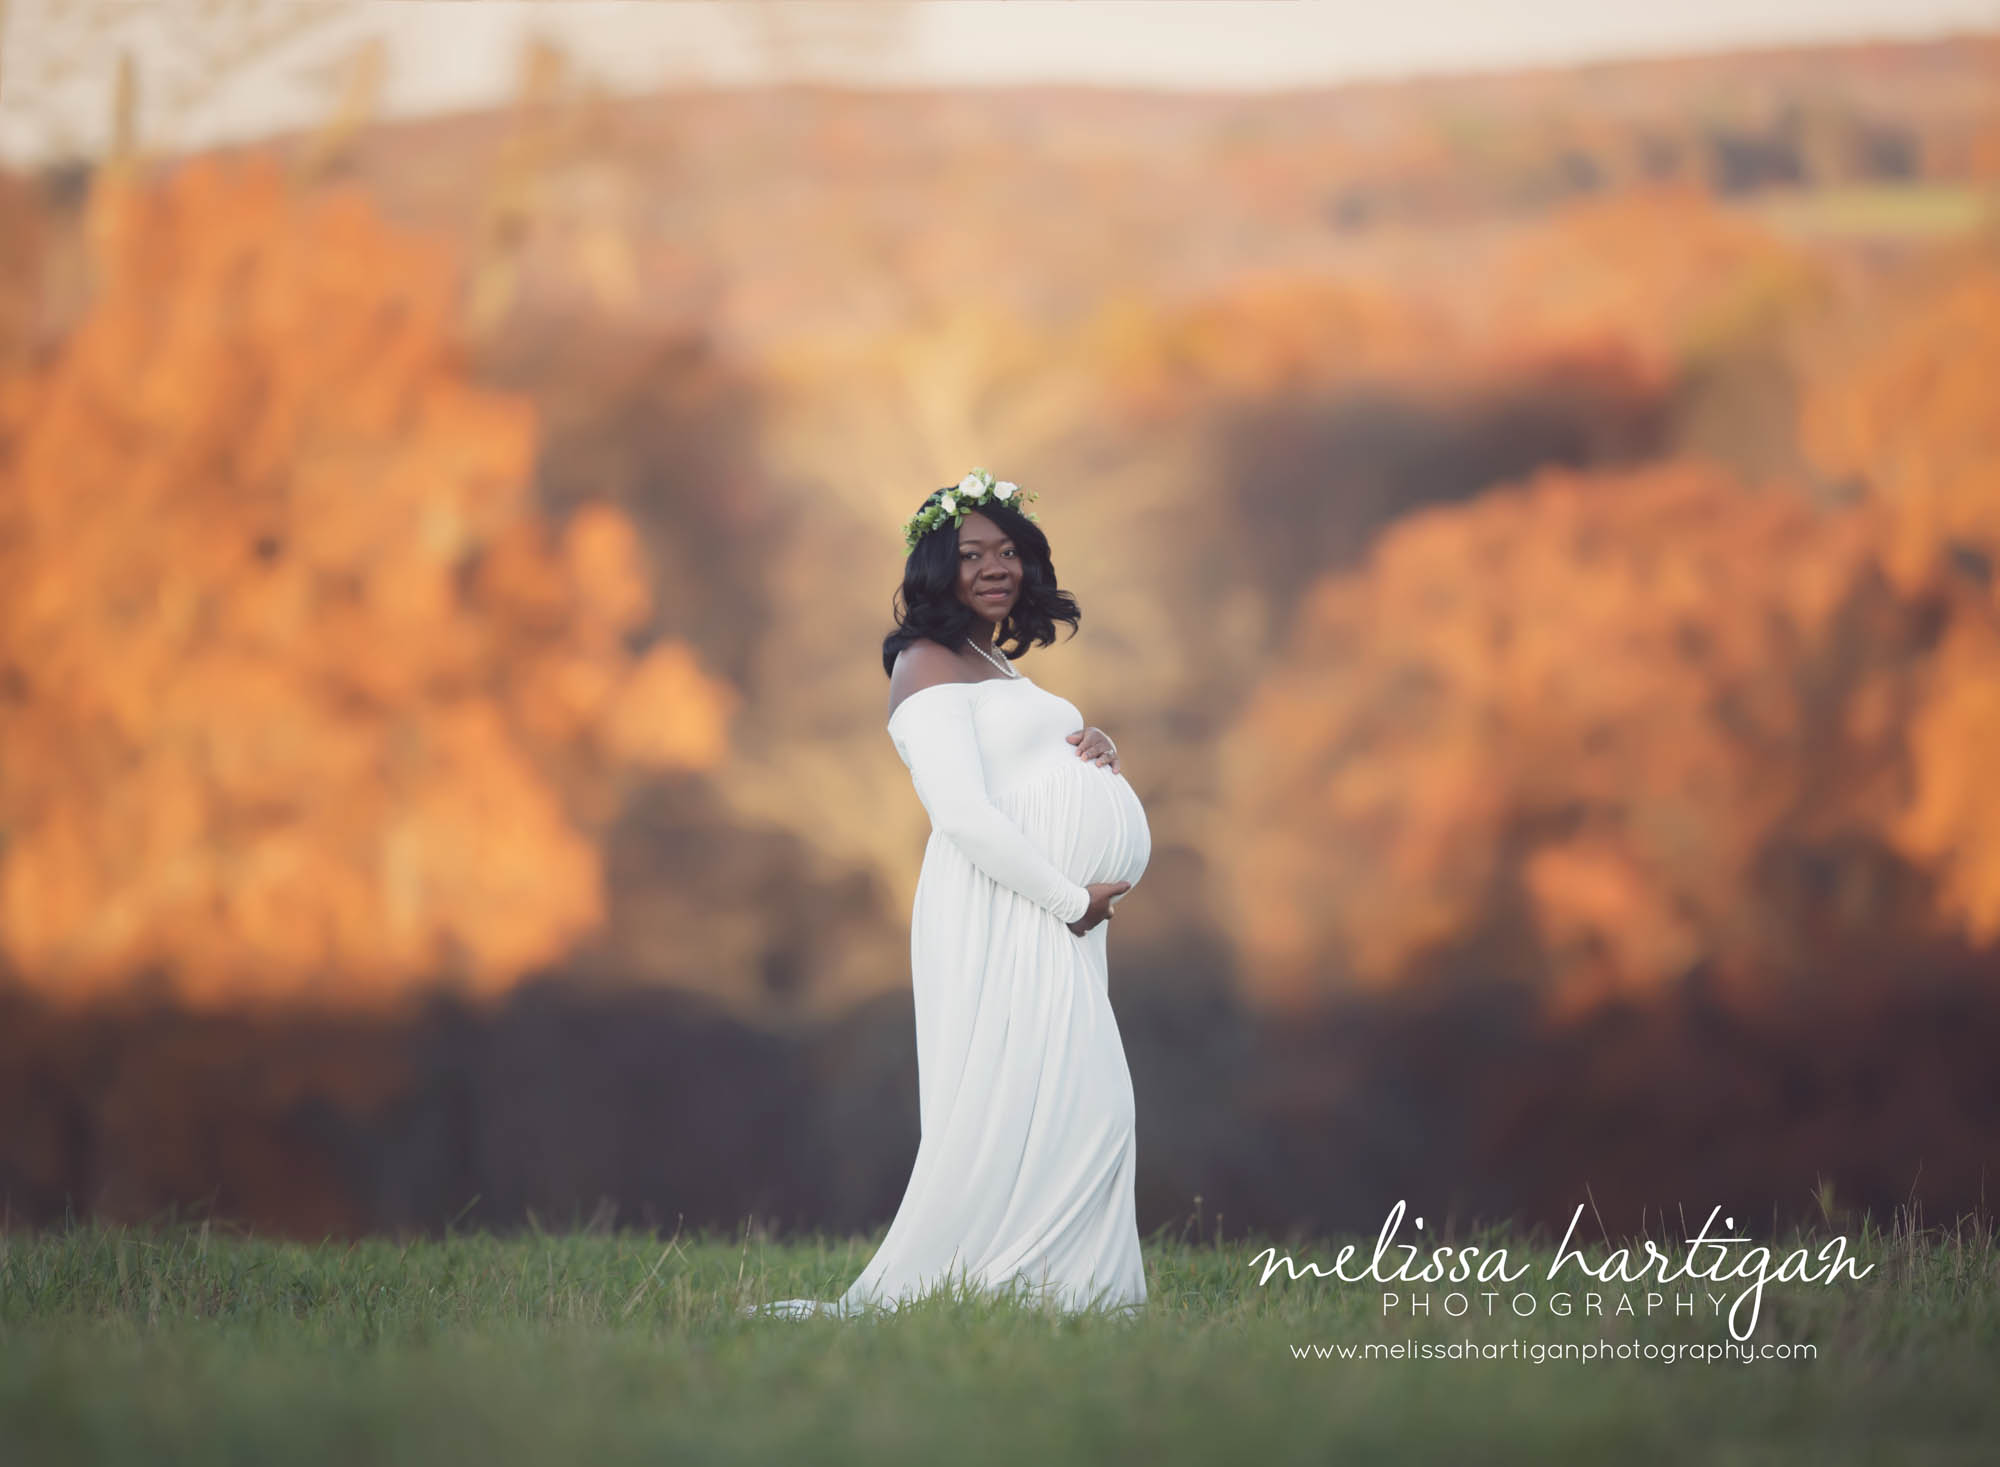 Melissa Hartigan Photography Connecticut Maternity and Newborn CT Photographer Coventry Ct Middlefield CT baby Fairfield county Maternity pose mommy-to-be wearing white maternity dress and floral wreath holding belly standing in field